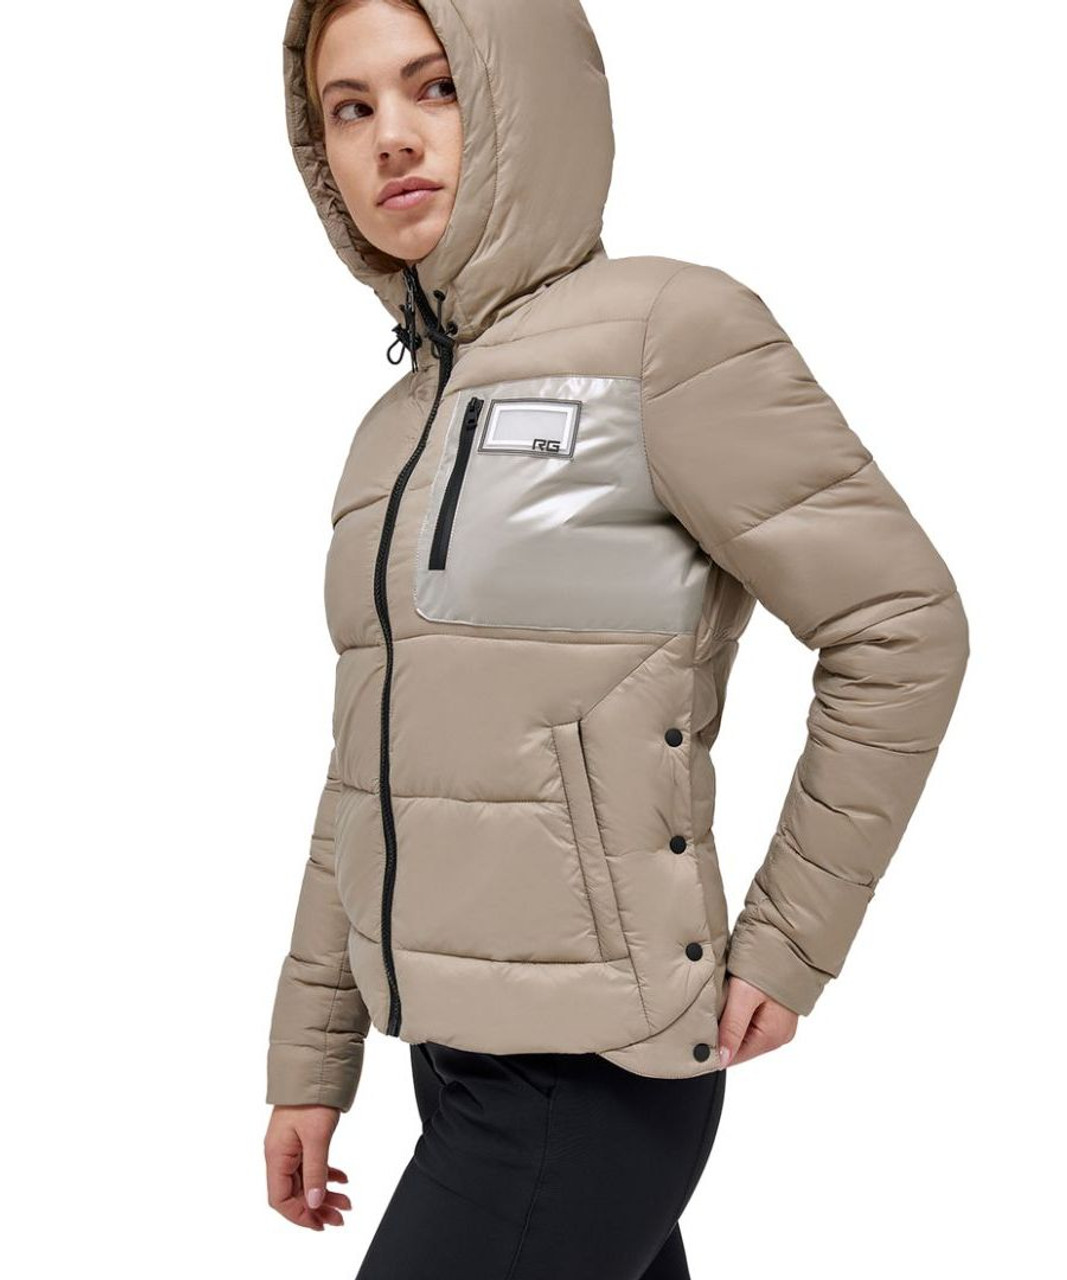 RG Nylon Quilted Hooded Puffer Jacket- Equestrian Outerwear